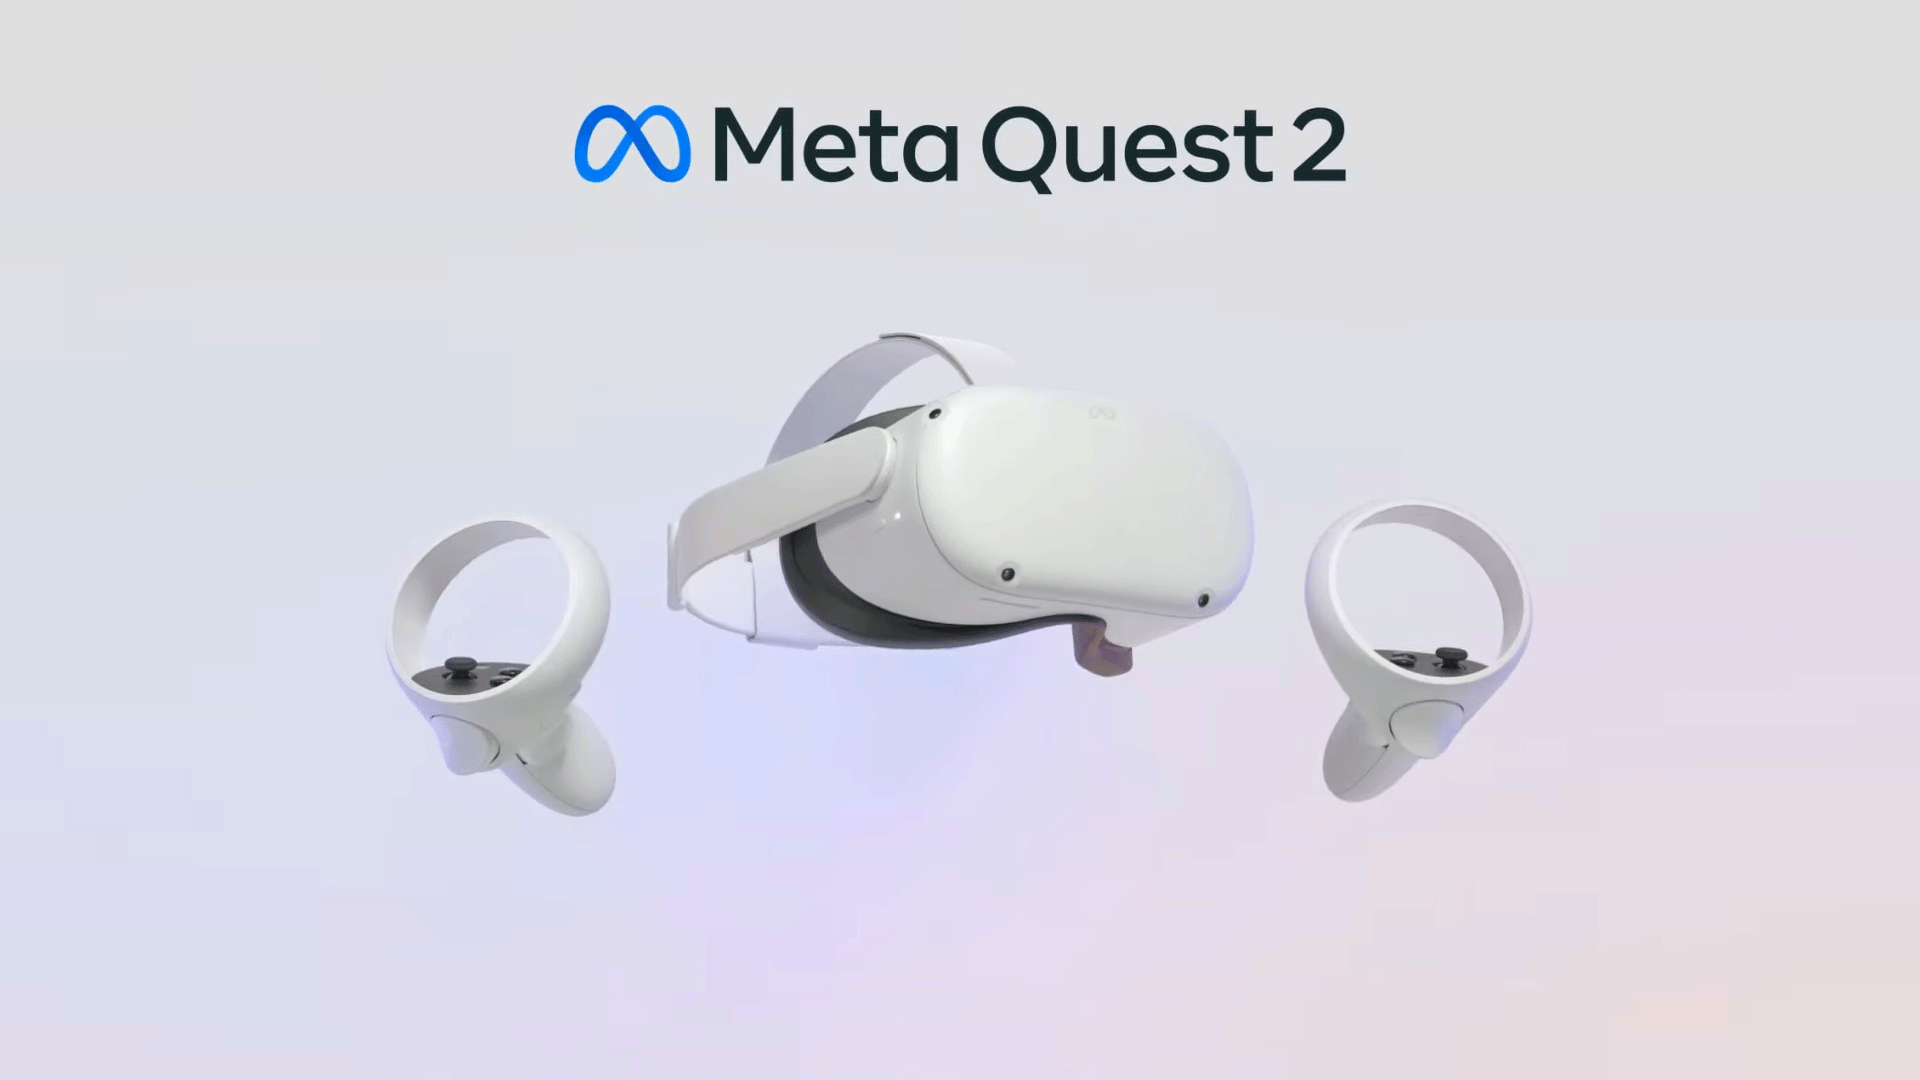 The Quest 2 No Longer Comes With the Oculus Logo